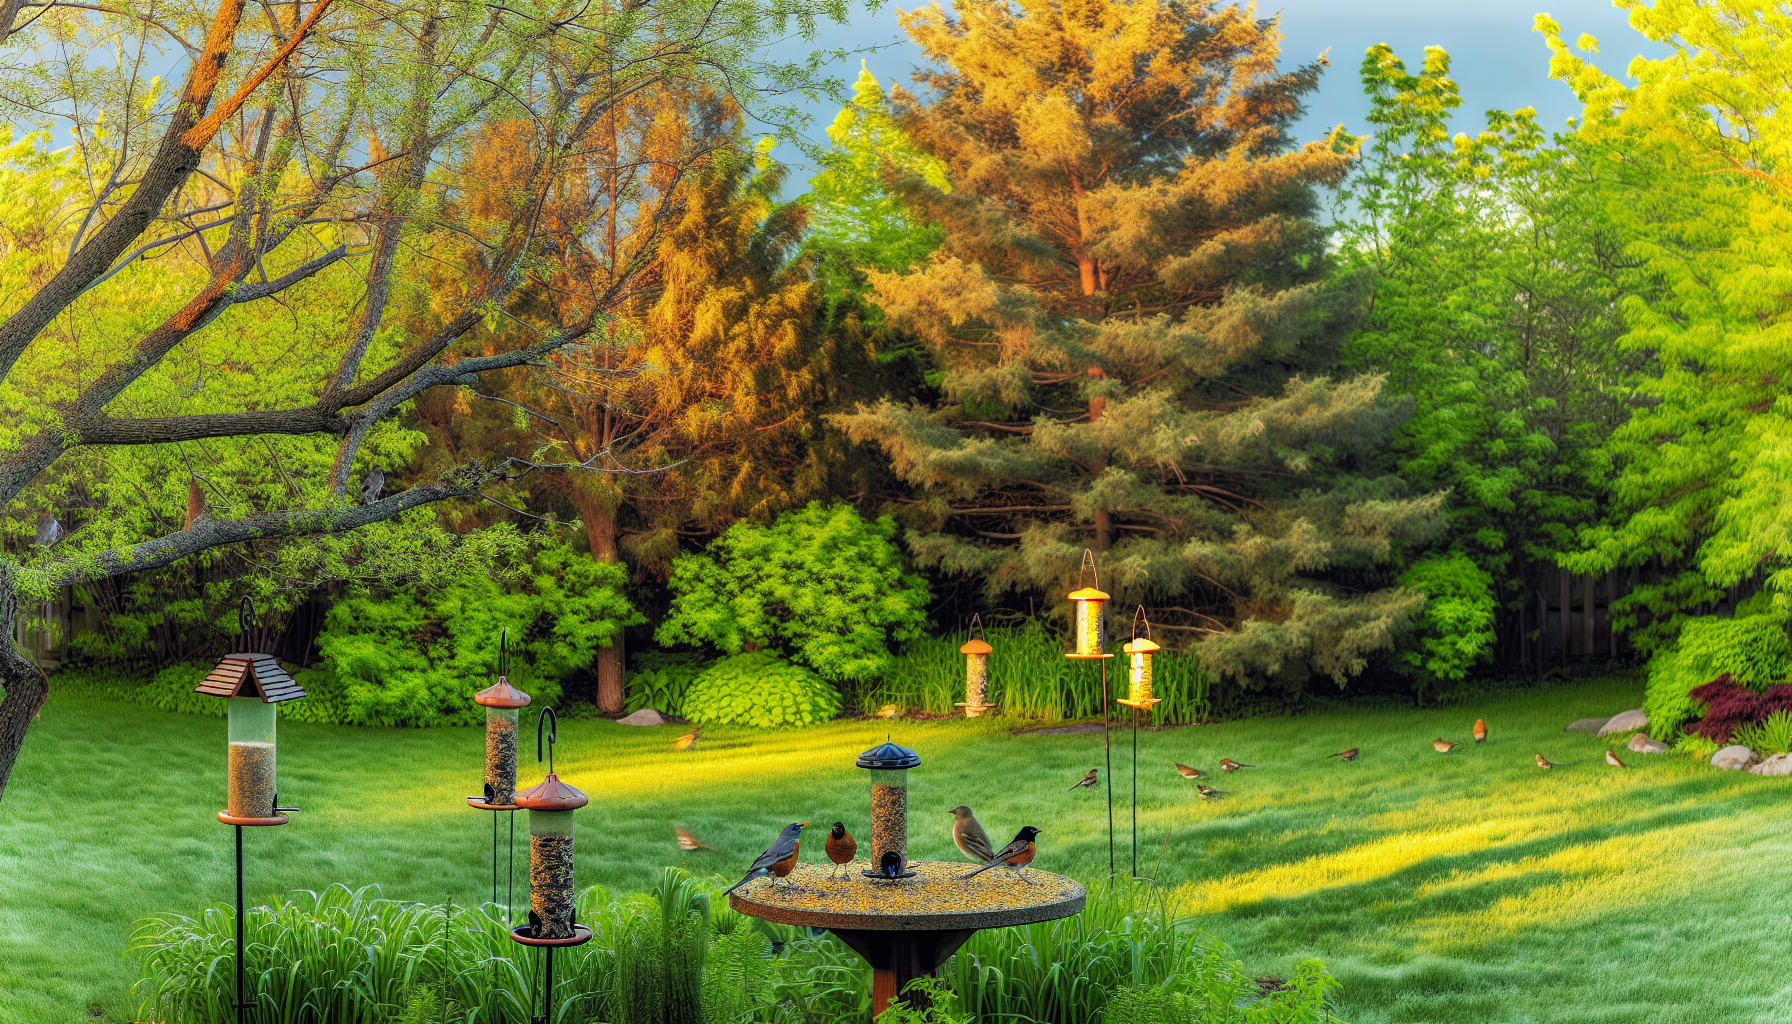 A serene backyard with bird feeders and a variety of bird species perched on branches